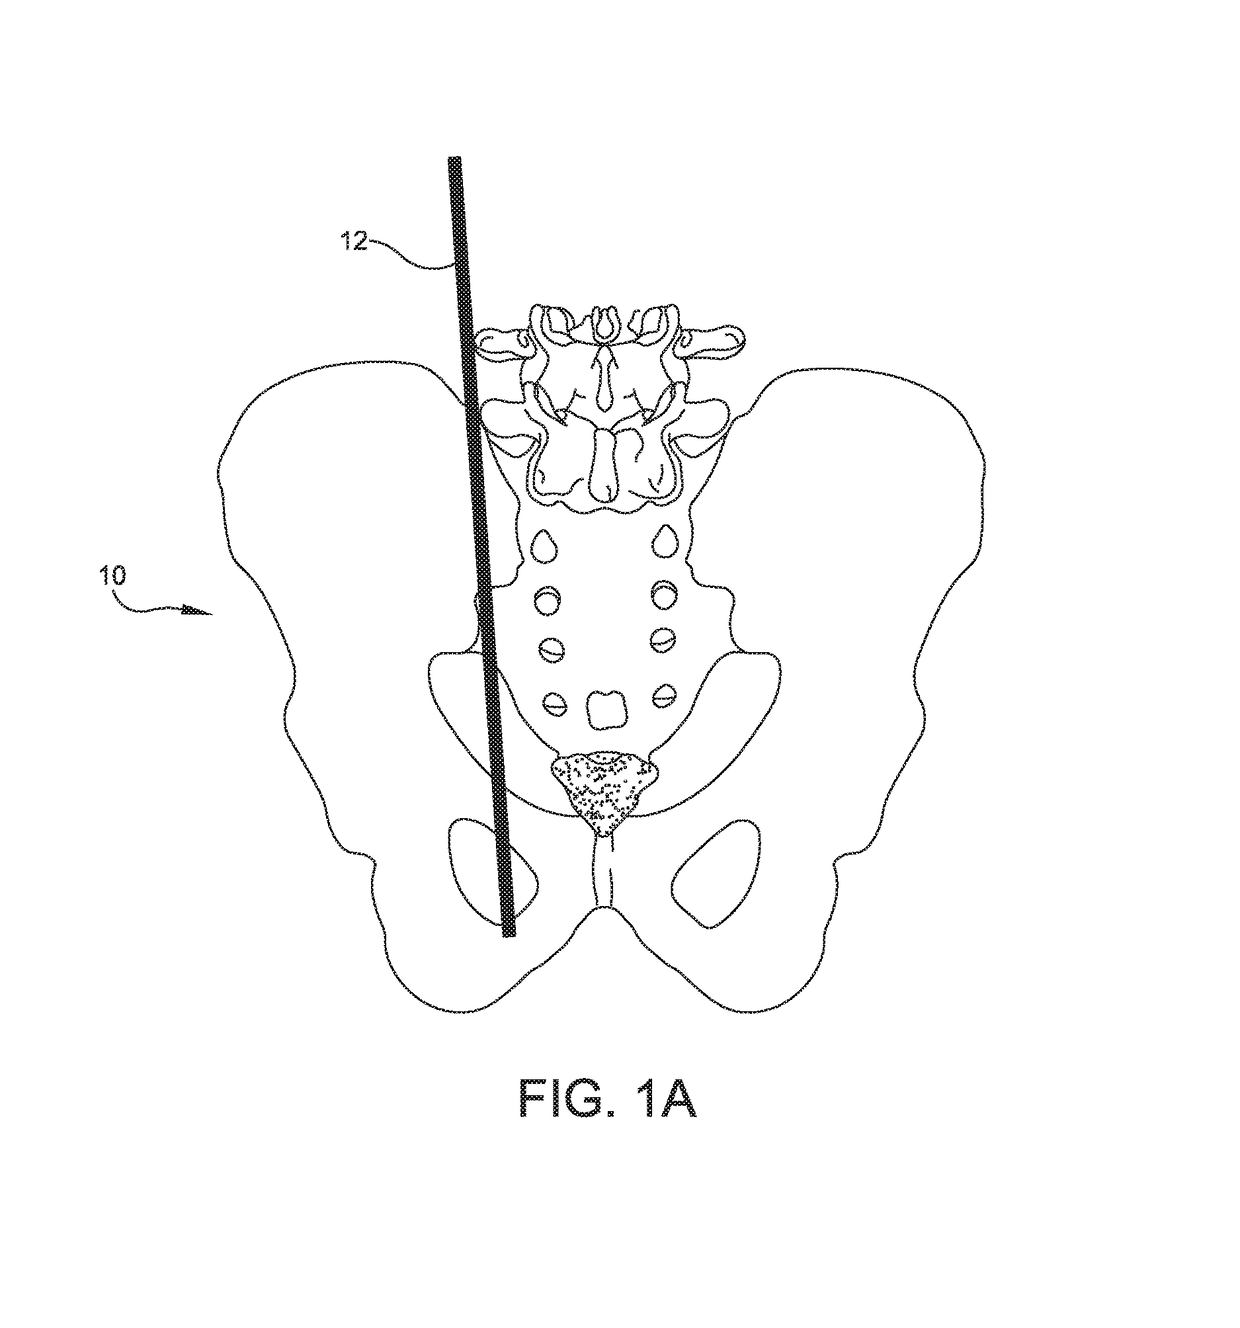 Tool and method for implanting fusion device into sacroiliac joint